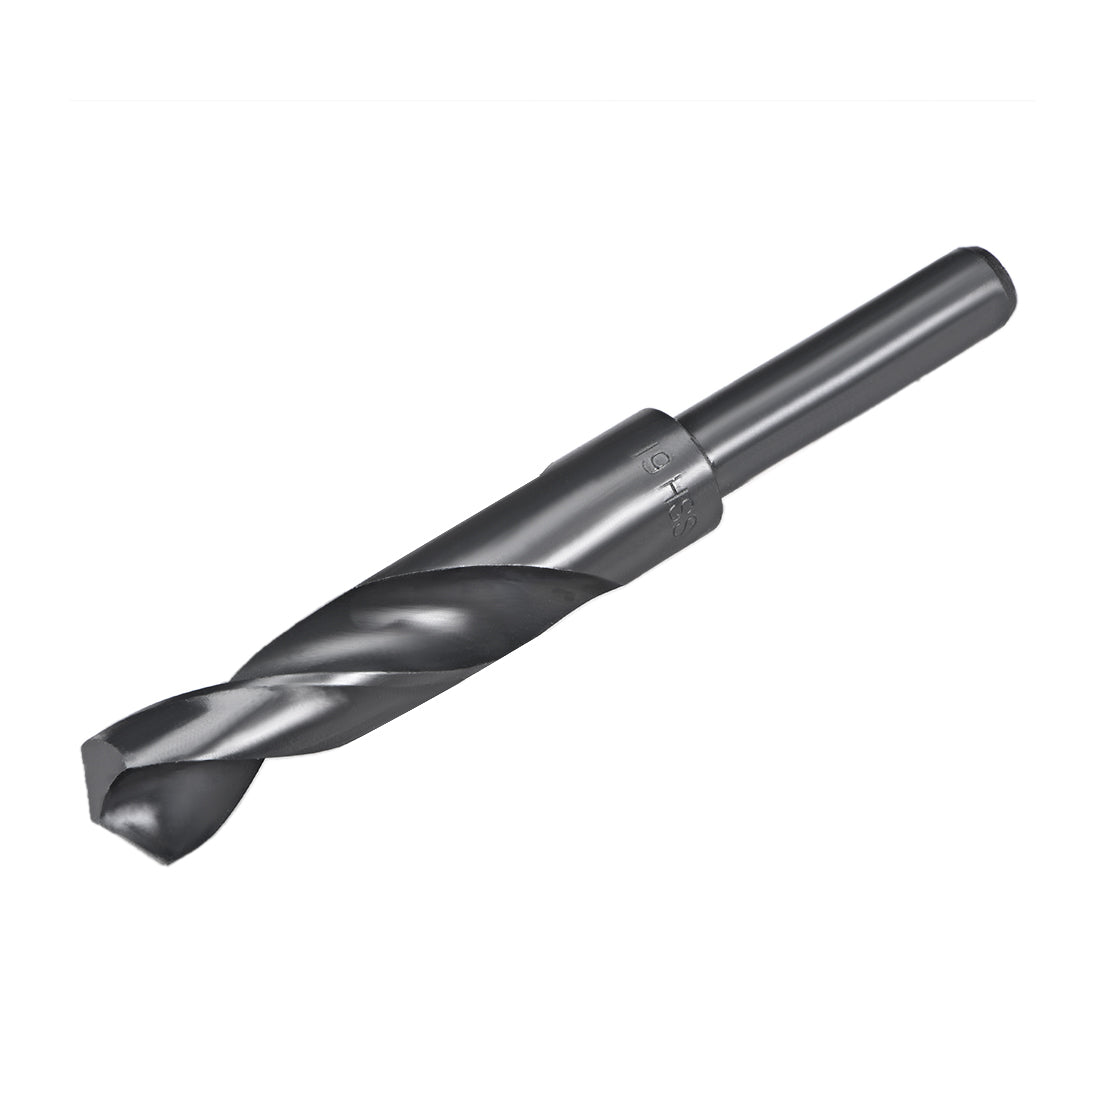 uxcell Uxcell Reduced Shank Drill Bit 19mm HSS 6542 Black Oxide with 1/2 Inch Straight Shank